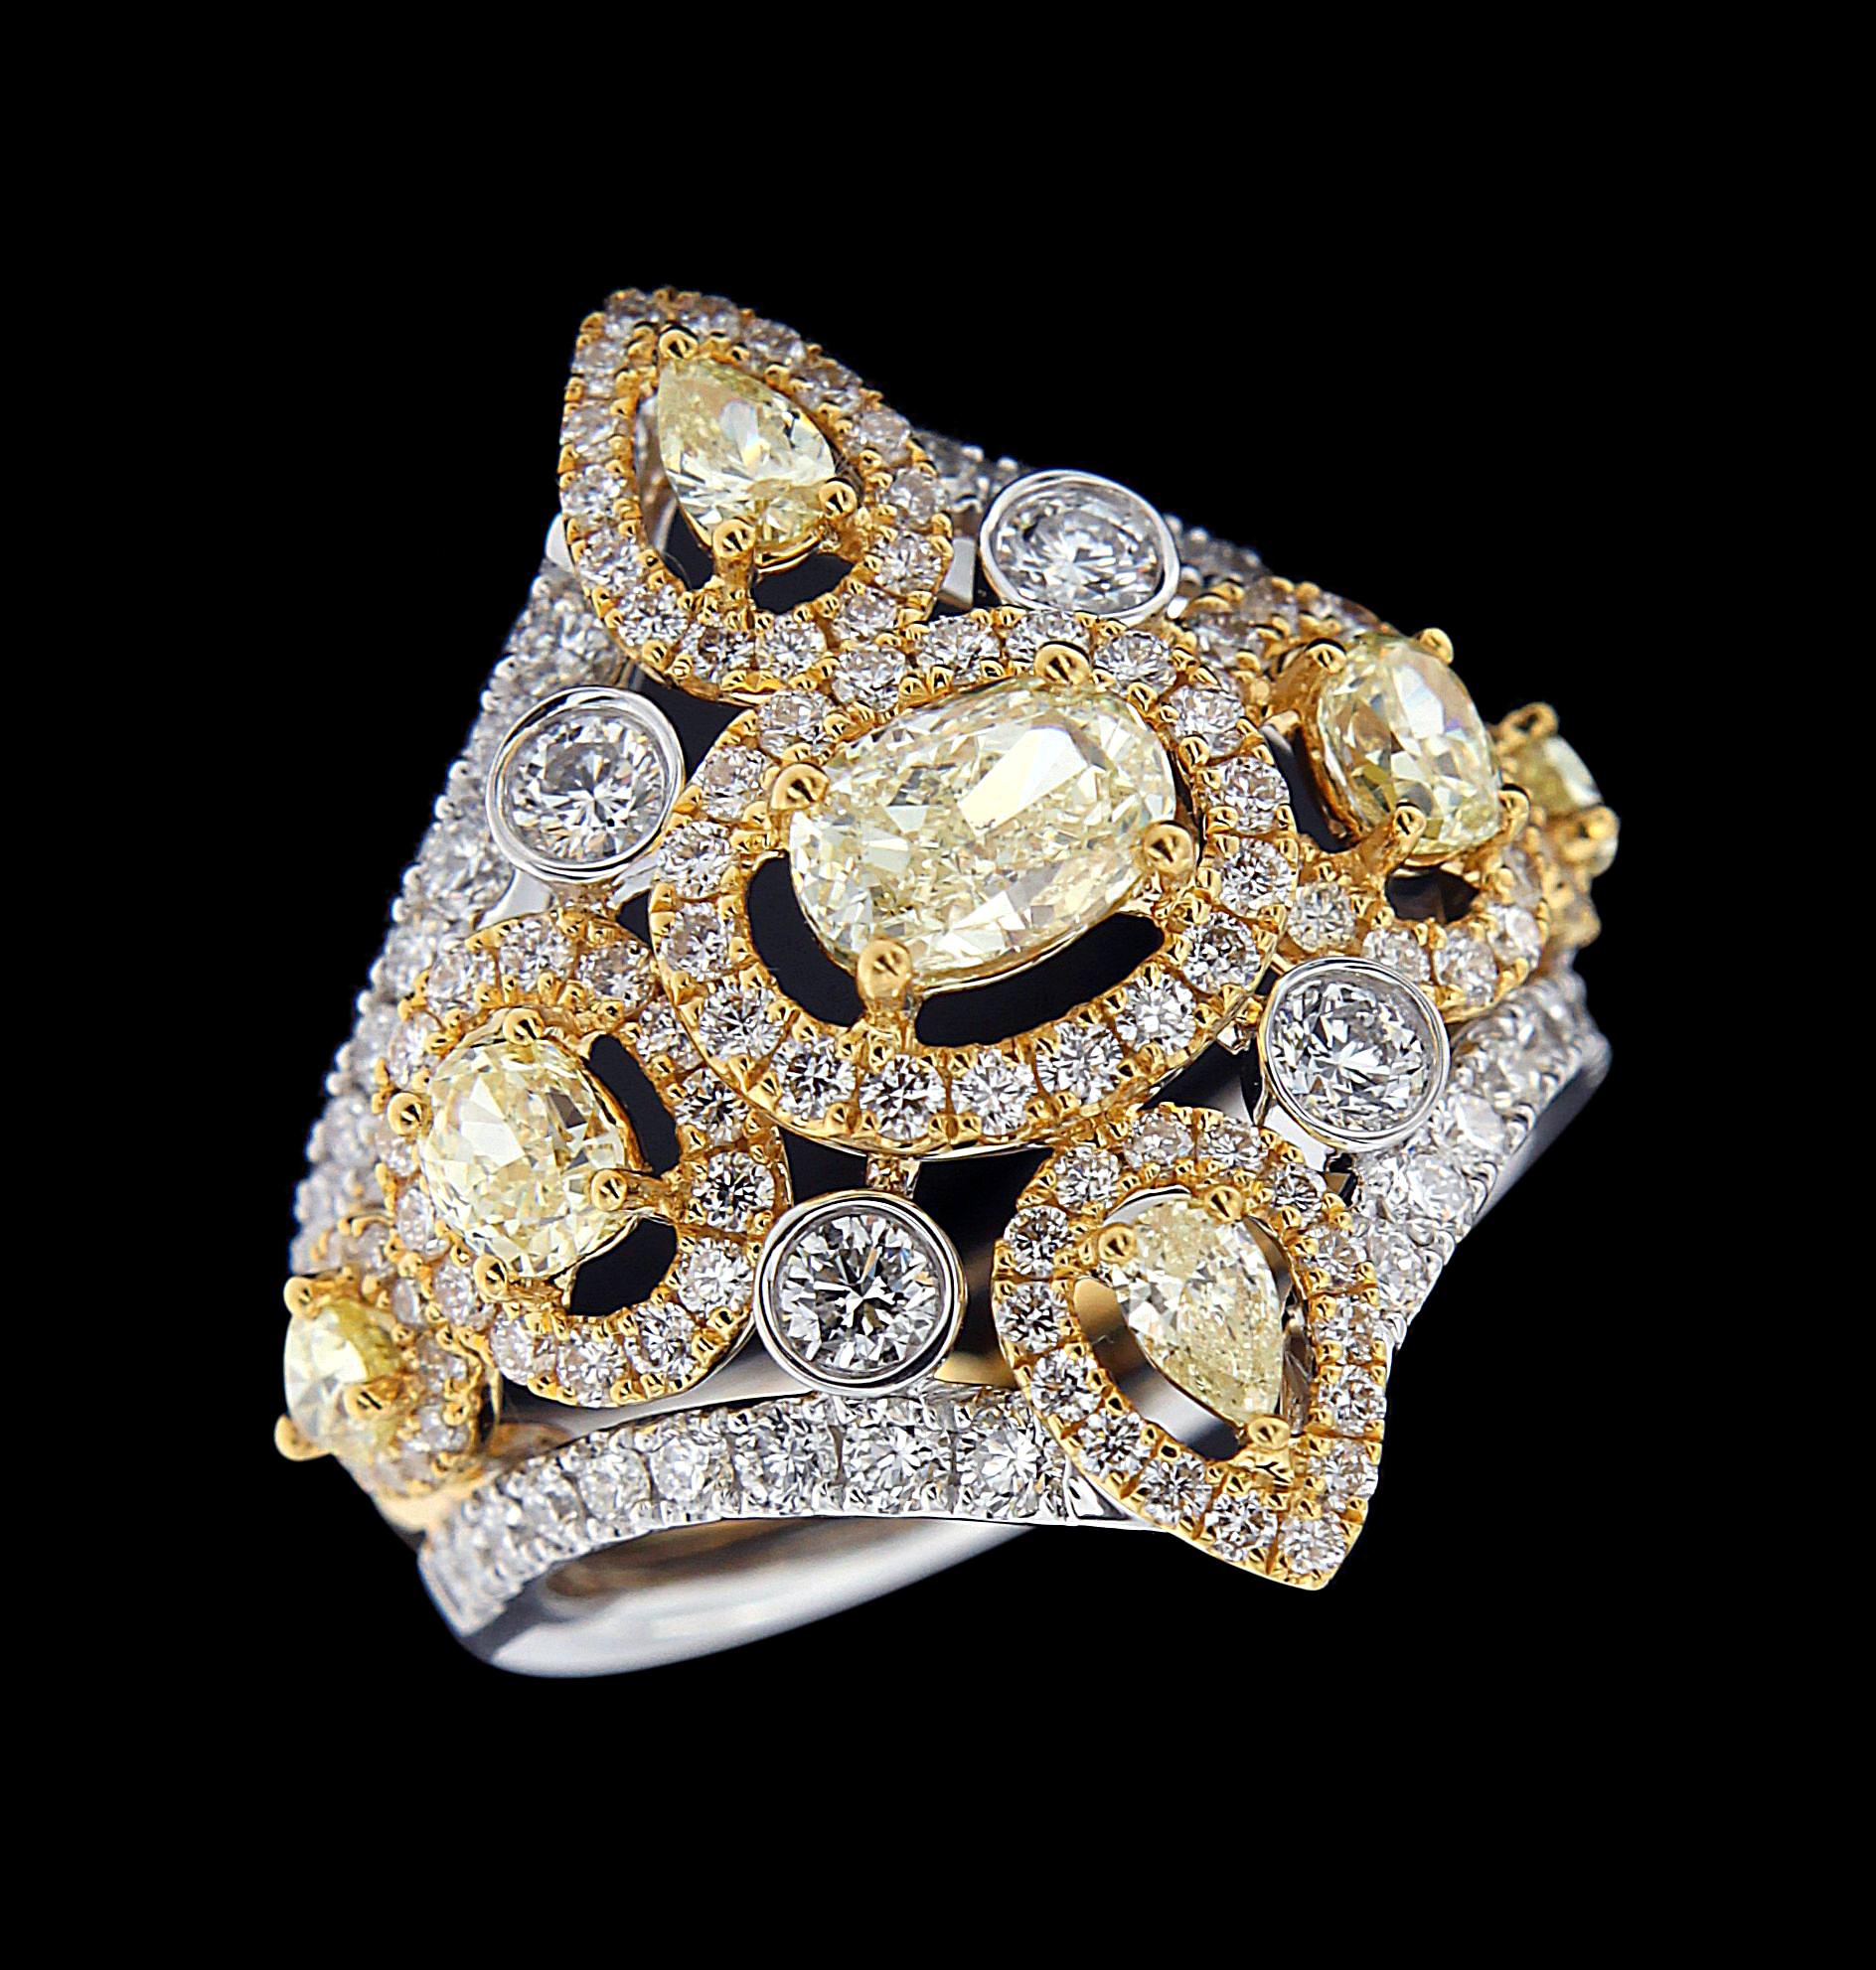 Contemporary Magnificent 18 Karat White and Yellow Gold and Diamond Ring For Sale